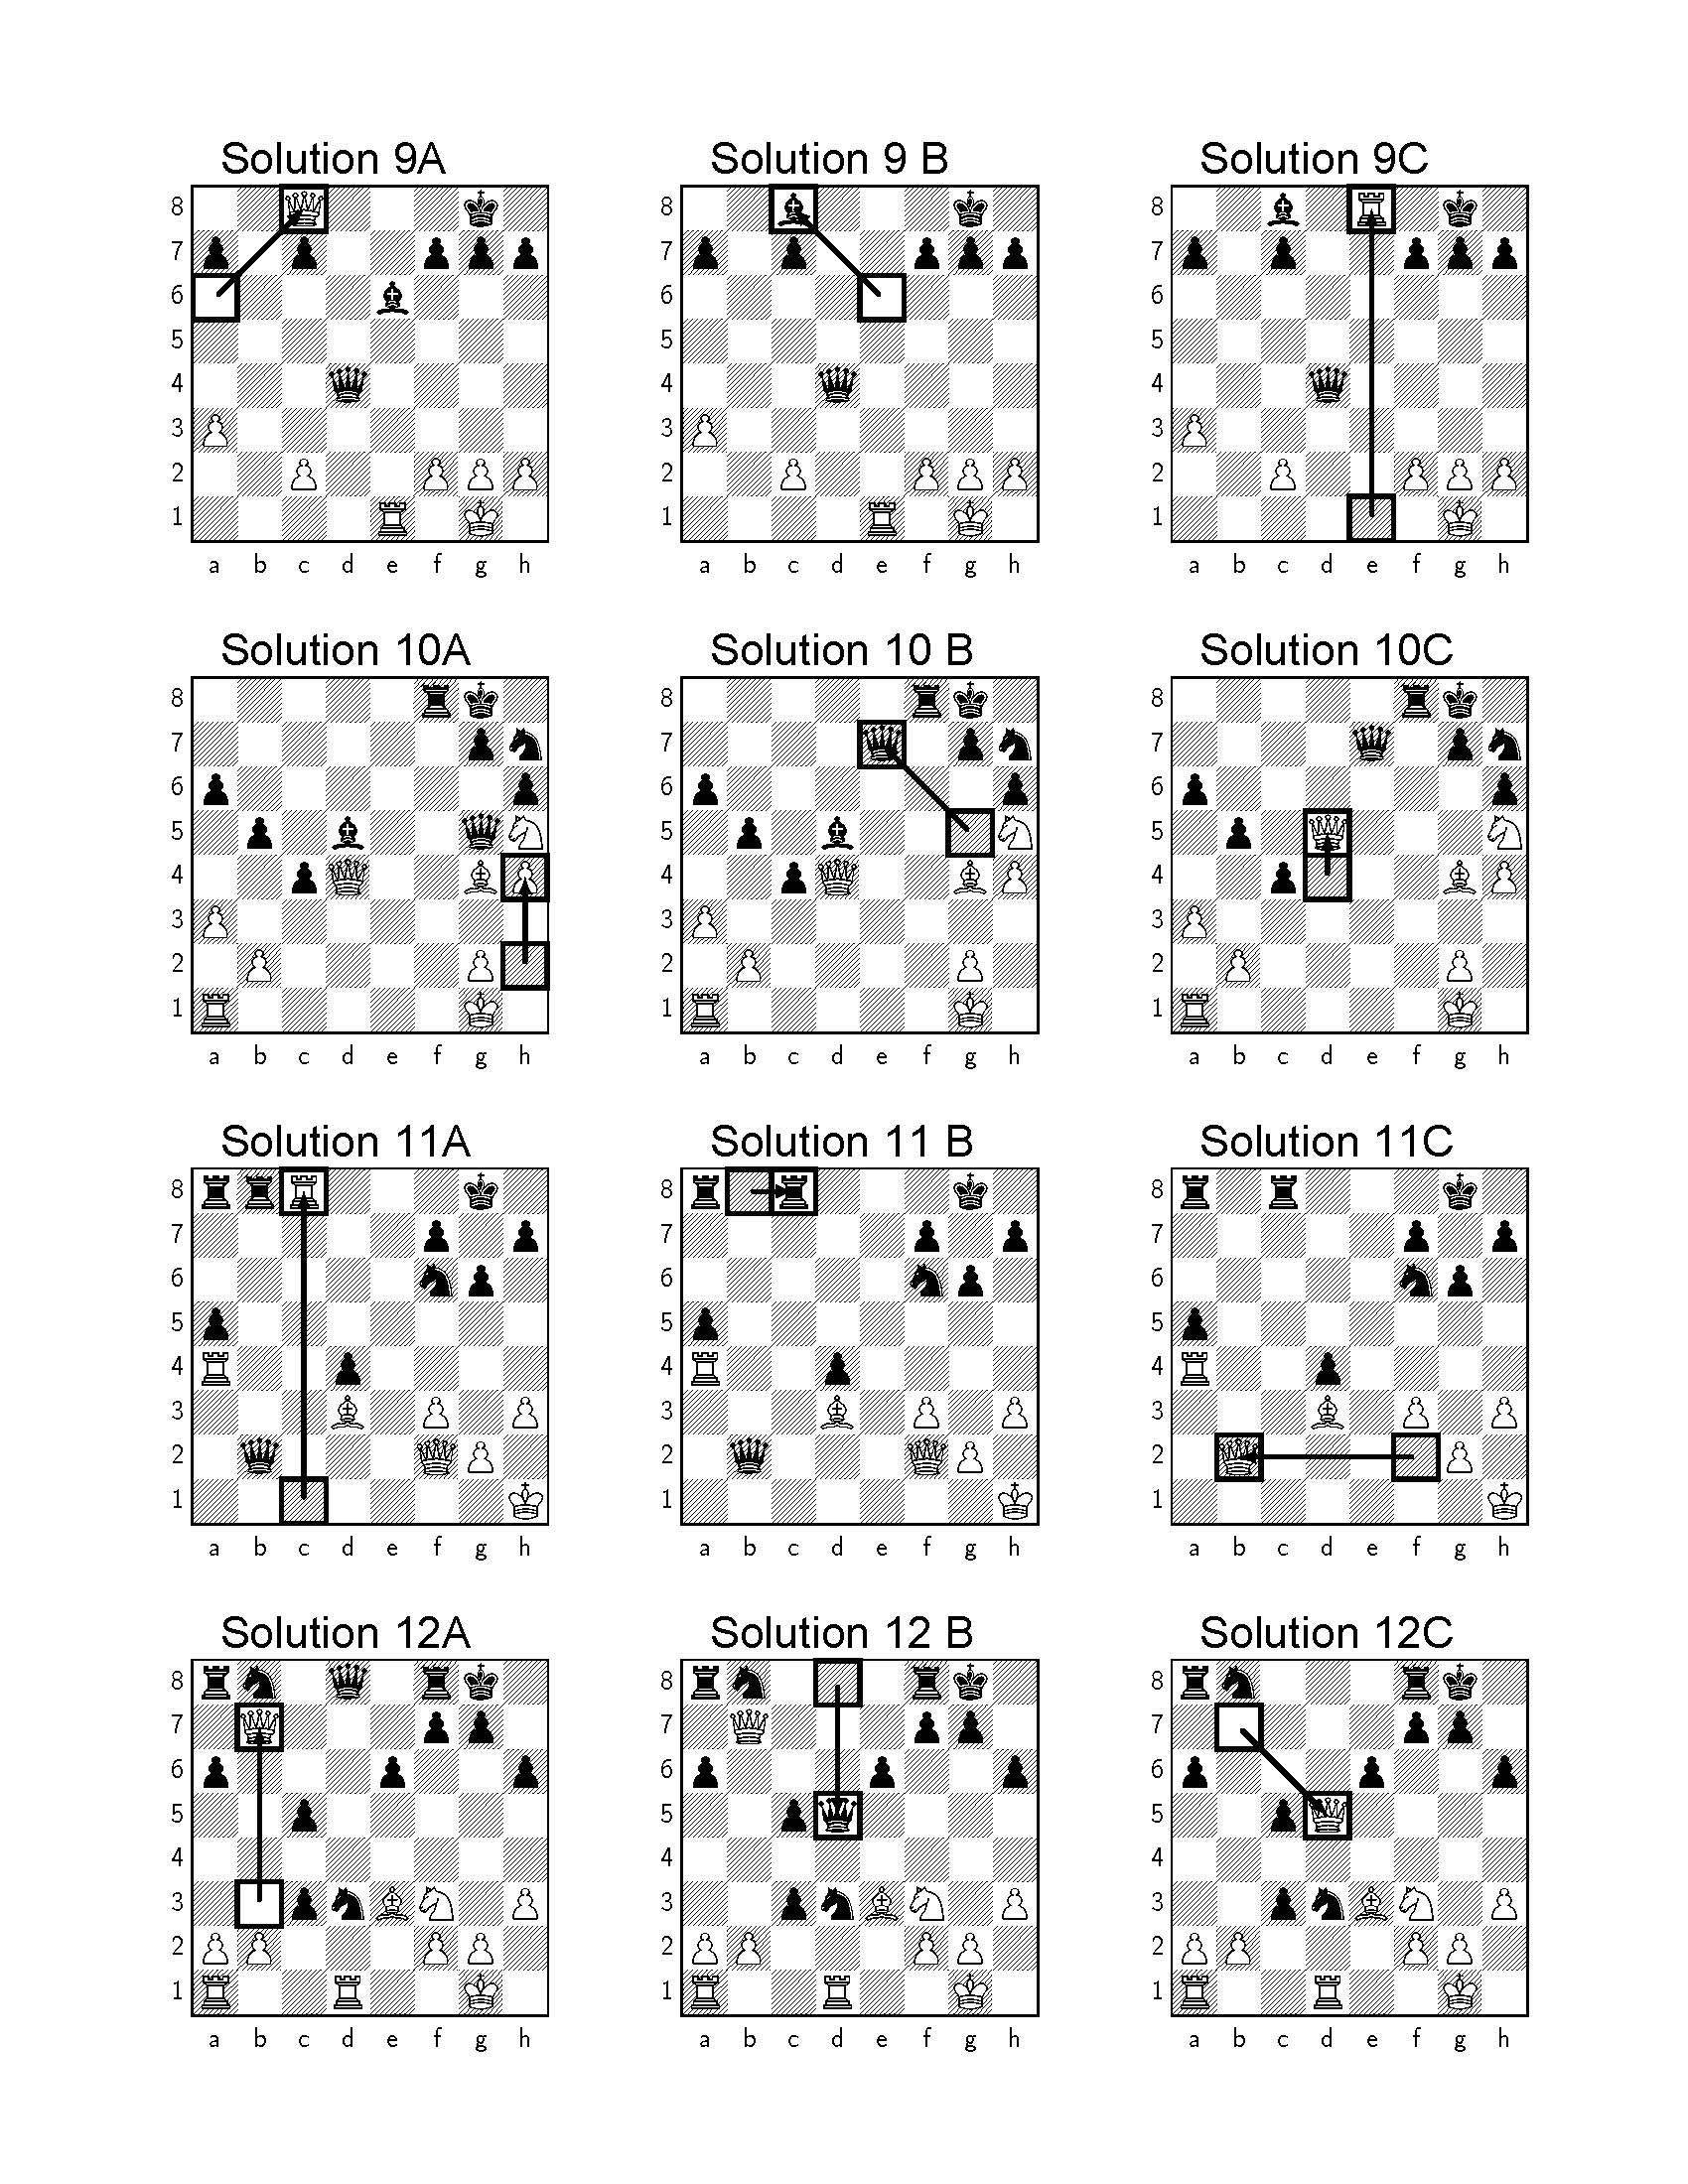 200 Challenging Chess Puzzles PDF Download